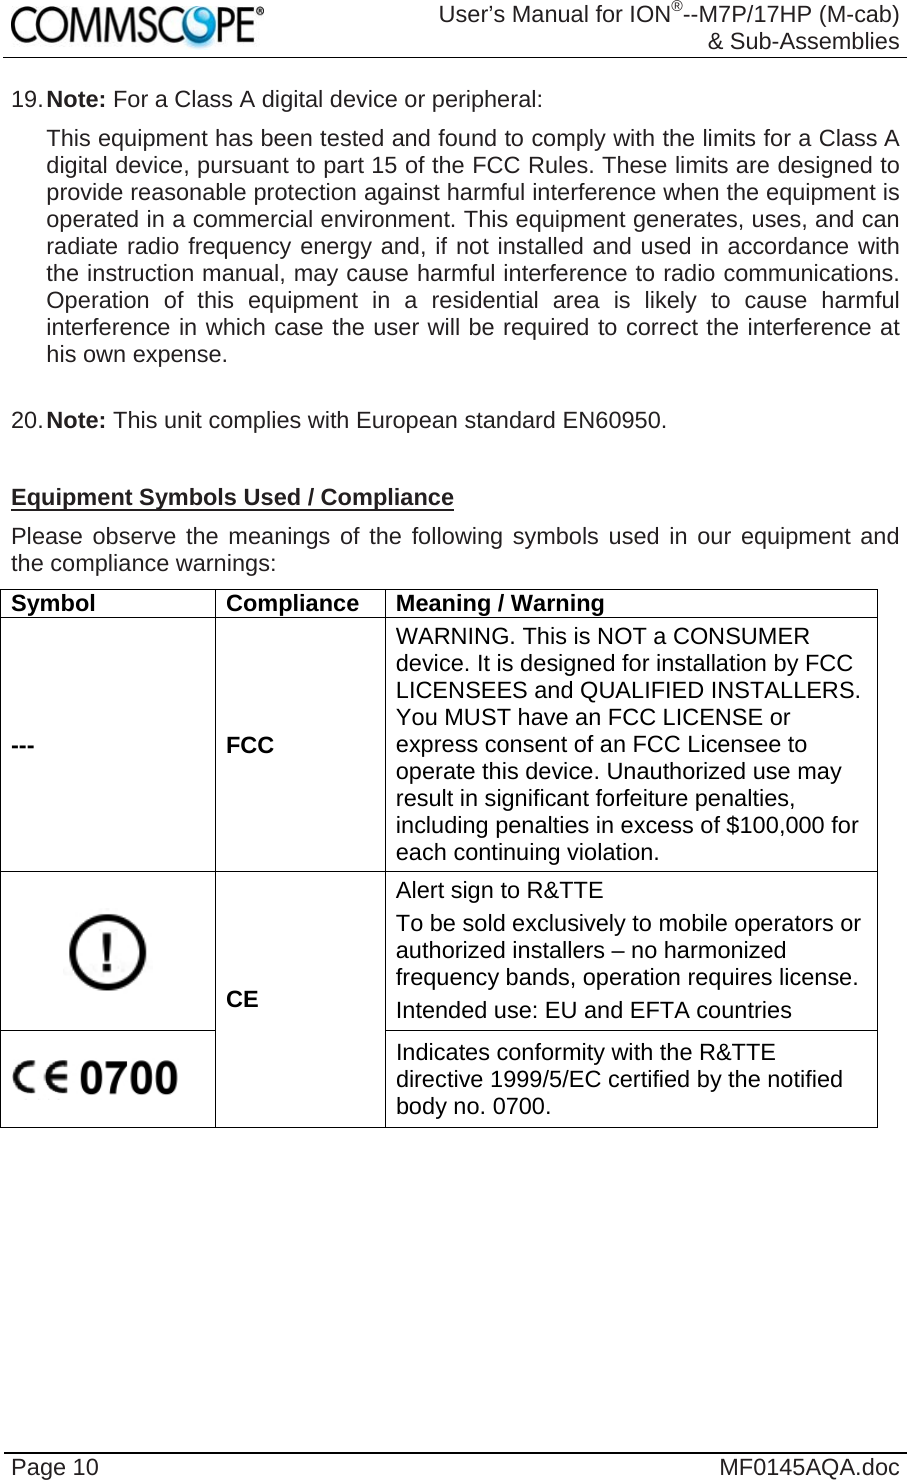  User’s Manual for ION®--M7P/17HP (M-cab) &amp; Sub-Assemblies Page 10  MF0145AQA.doc 19. Note: For a Class A digital device or peripheral: This equipment has been tested and found to comply with the limits for a Class A digital device, pursuant to part 15 of the FCC Rules. These limits are designed to provide reasonable protection against harmful interference when the equipment is operated in a commercial environment. This equipment generates, uses, and can radiate radio frequency energy and, if not installed and used in accordance with the instruction manual, may cause harmful interference to radio communications. Operation of this equipment in a residential area is likely to cause harmful interference in which case the user will be required to correct the interference at his own expense.  20. Note: This unit complies with European standard EN60950.  Equipment Symbols Used / Compliance Please observe the meanings of the following symbols used in our equipment and the compliance warnings: Symbol Compliance Meaning / Warning --- FCC WARNING. This is NOT a CONSUMER device. It is designed for installation by FCC LICENSEES and QUALIFIED INSTALLERS. You MUST have an FCC LICENSE or express consent of an FCC Licensee to operate this device. Unauthorized use may result in significant forfeiture penalties, including penalties in excess of $100,000 for each continuing violation.  CE Alert sign to R&amp;TTE To be sold exclusively to mobile operators or authorized installers – no harmonized frequency bands, operation requires license. Intended use: EU and EFTA countries  Indicates conformity with the R&amp;TTE directive 1999/5/EC certified by the notified body no. 0700.     